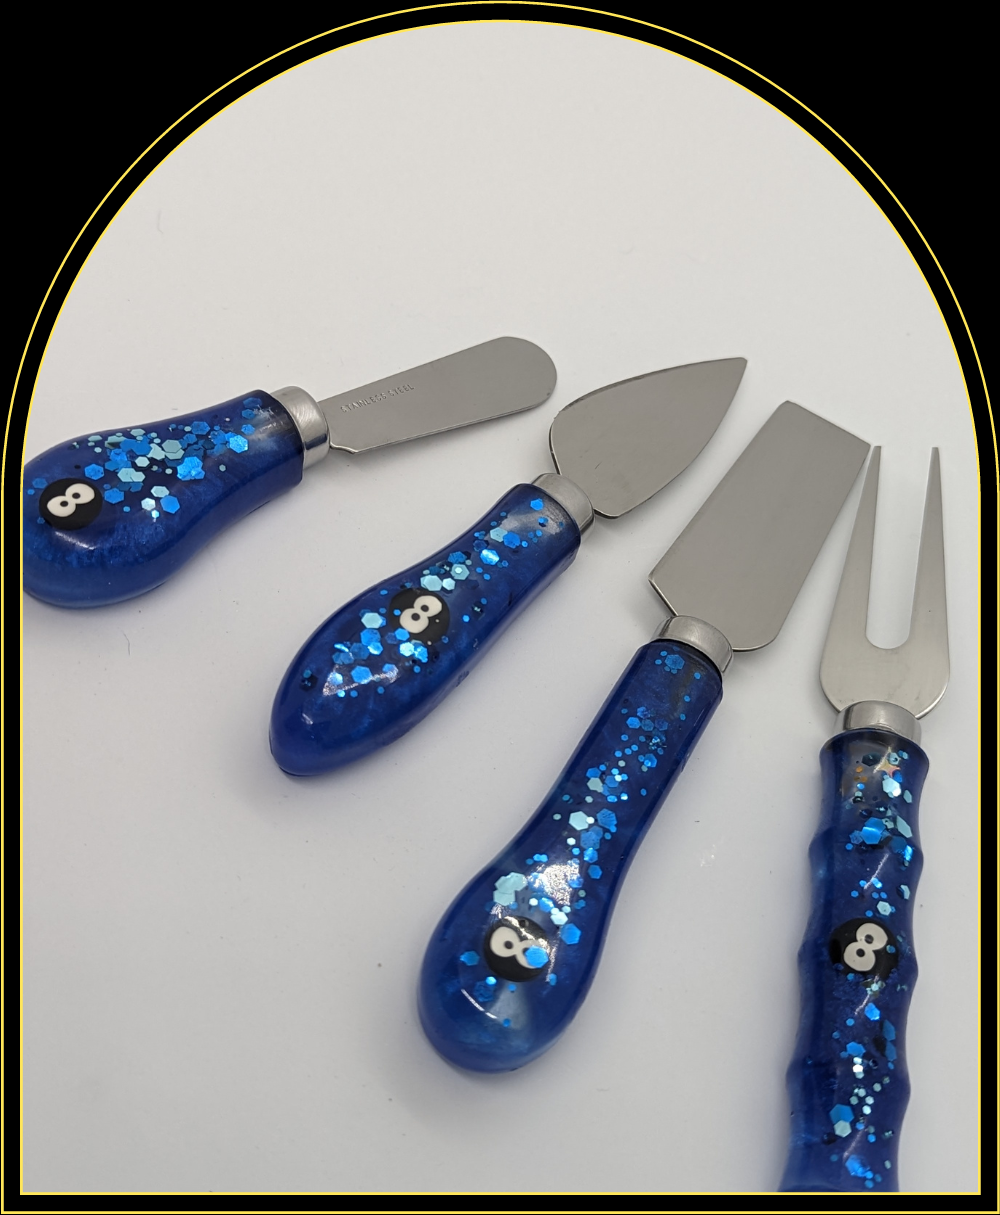 Cheese Knife W/ BoardsThis set of cheese knives and boards makes a perfect addition to any cheese platter. Offering custom resin handles and full-tang stainless steel blades, these knivesWitchin Waifu